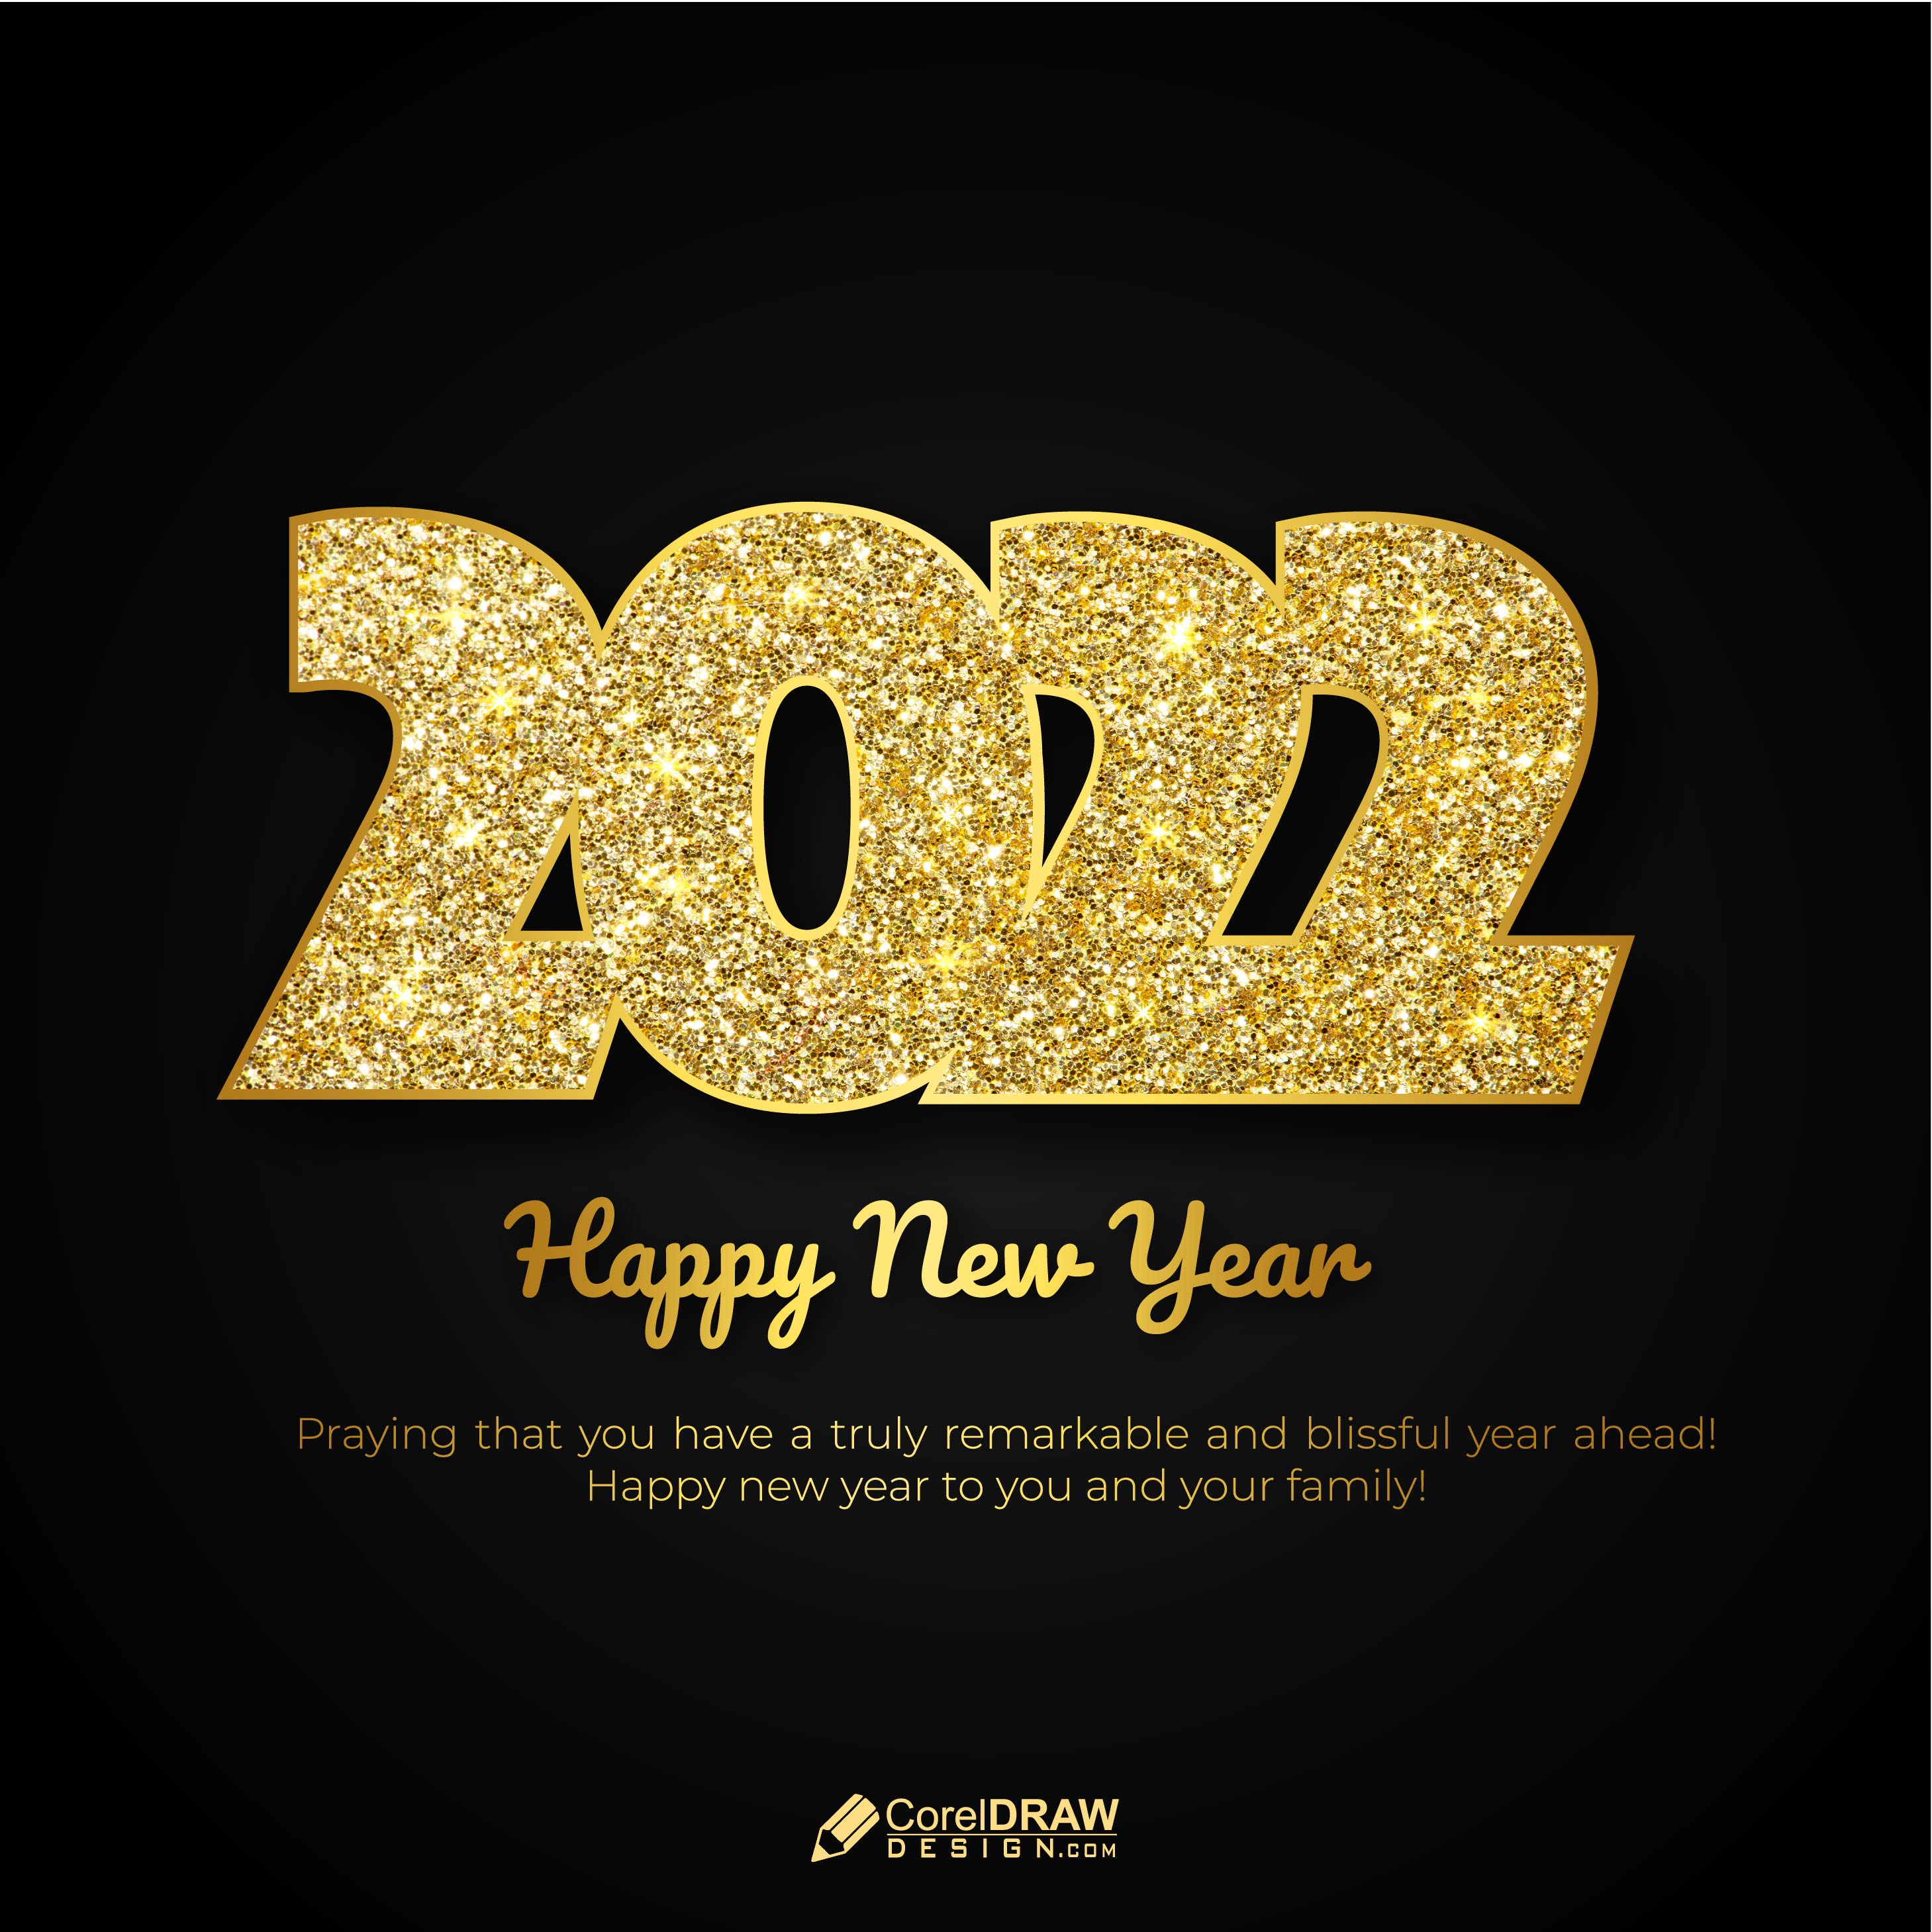 Beautiful Happy New Year 2022 Vector Wishes Card Template